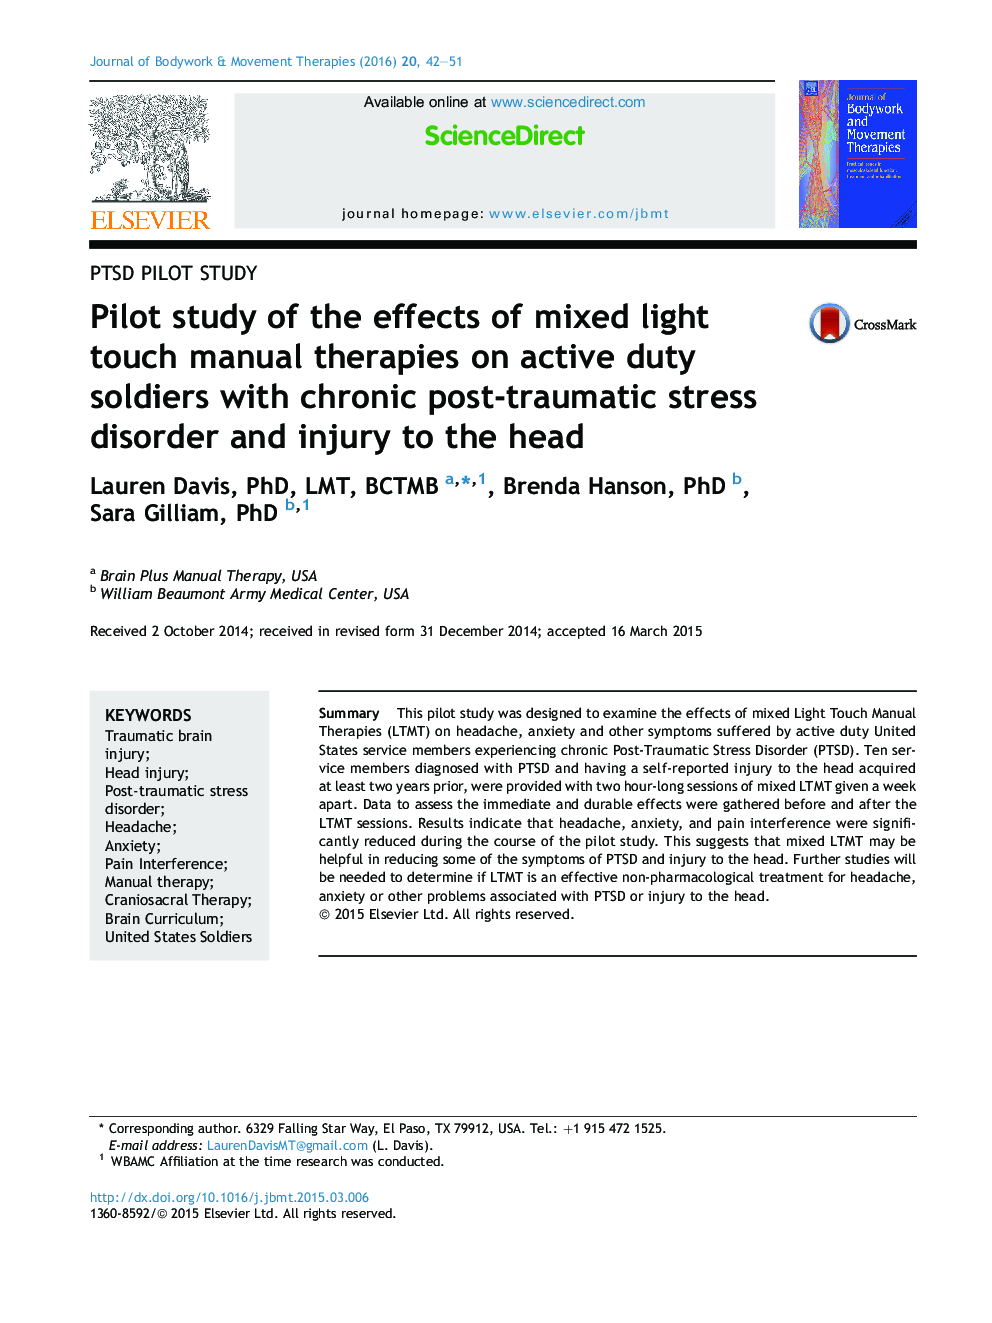 PTSD pilot studyPilot study of the effects of mixed light touch manual therapies on active duty soldiers with chronic post-traumatic stress disorder and injury to the head